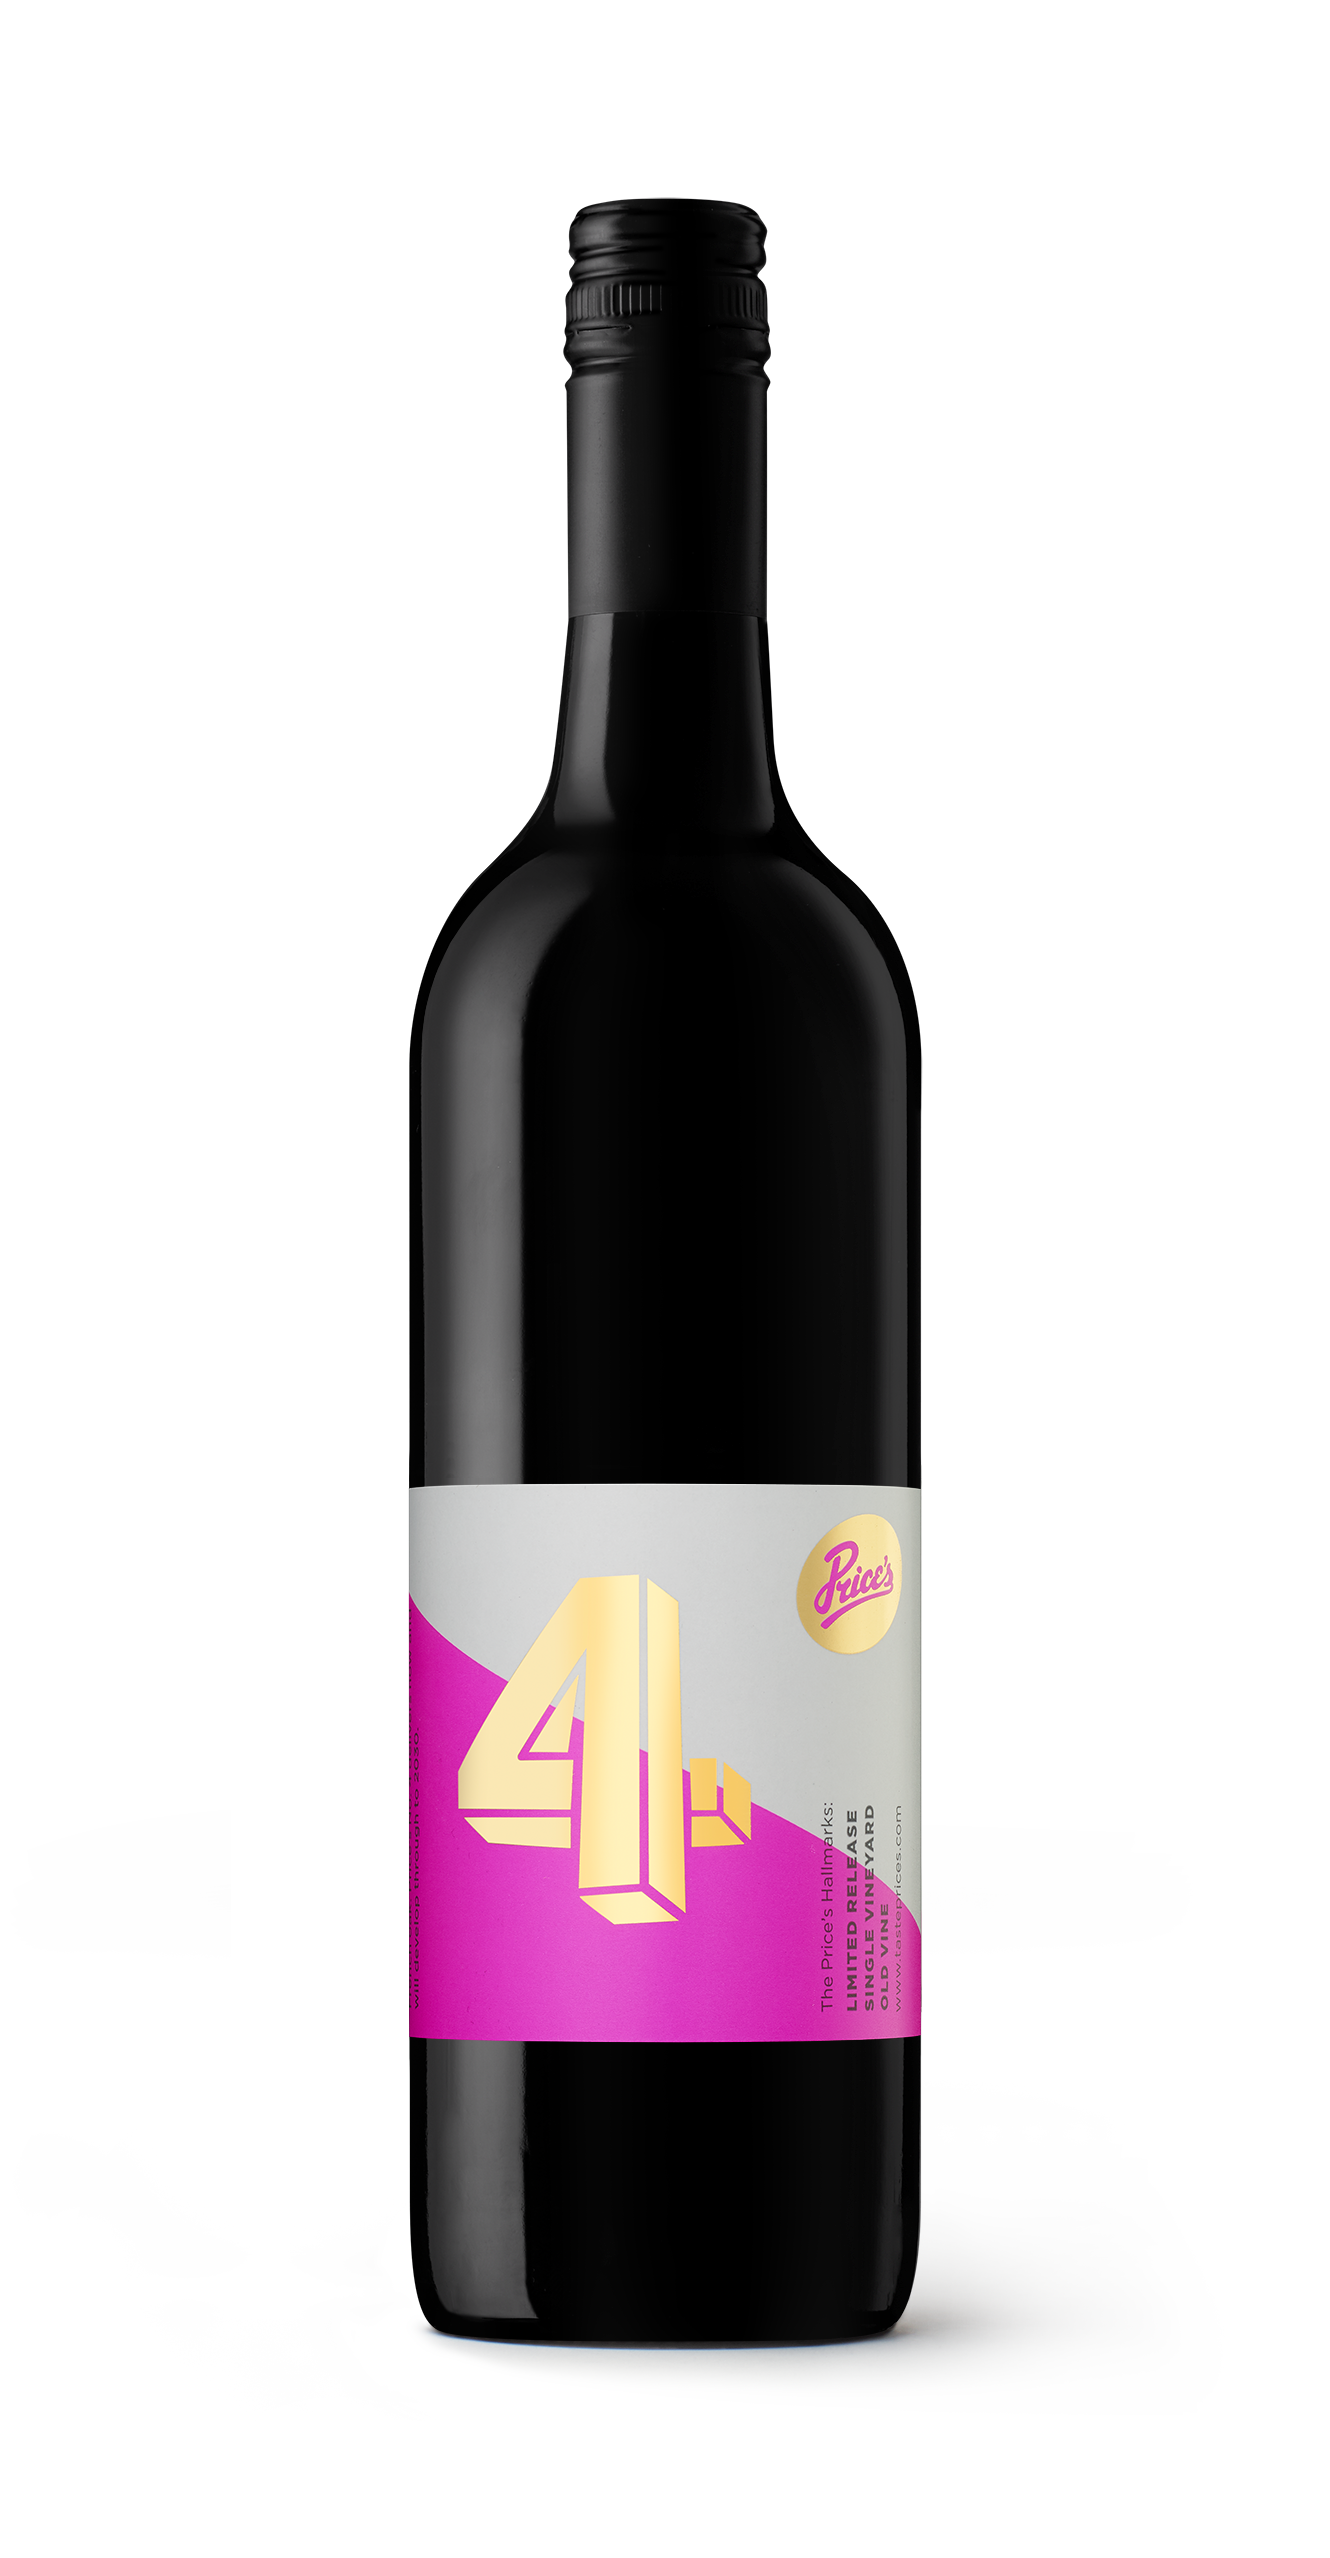 This premium bottle of Shiraz and Malbec blend is from McLaren Vale. No.4 is a full-bodied wine produced from old vines. It has a striking label and is of excellent quality from Price's Wines.